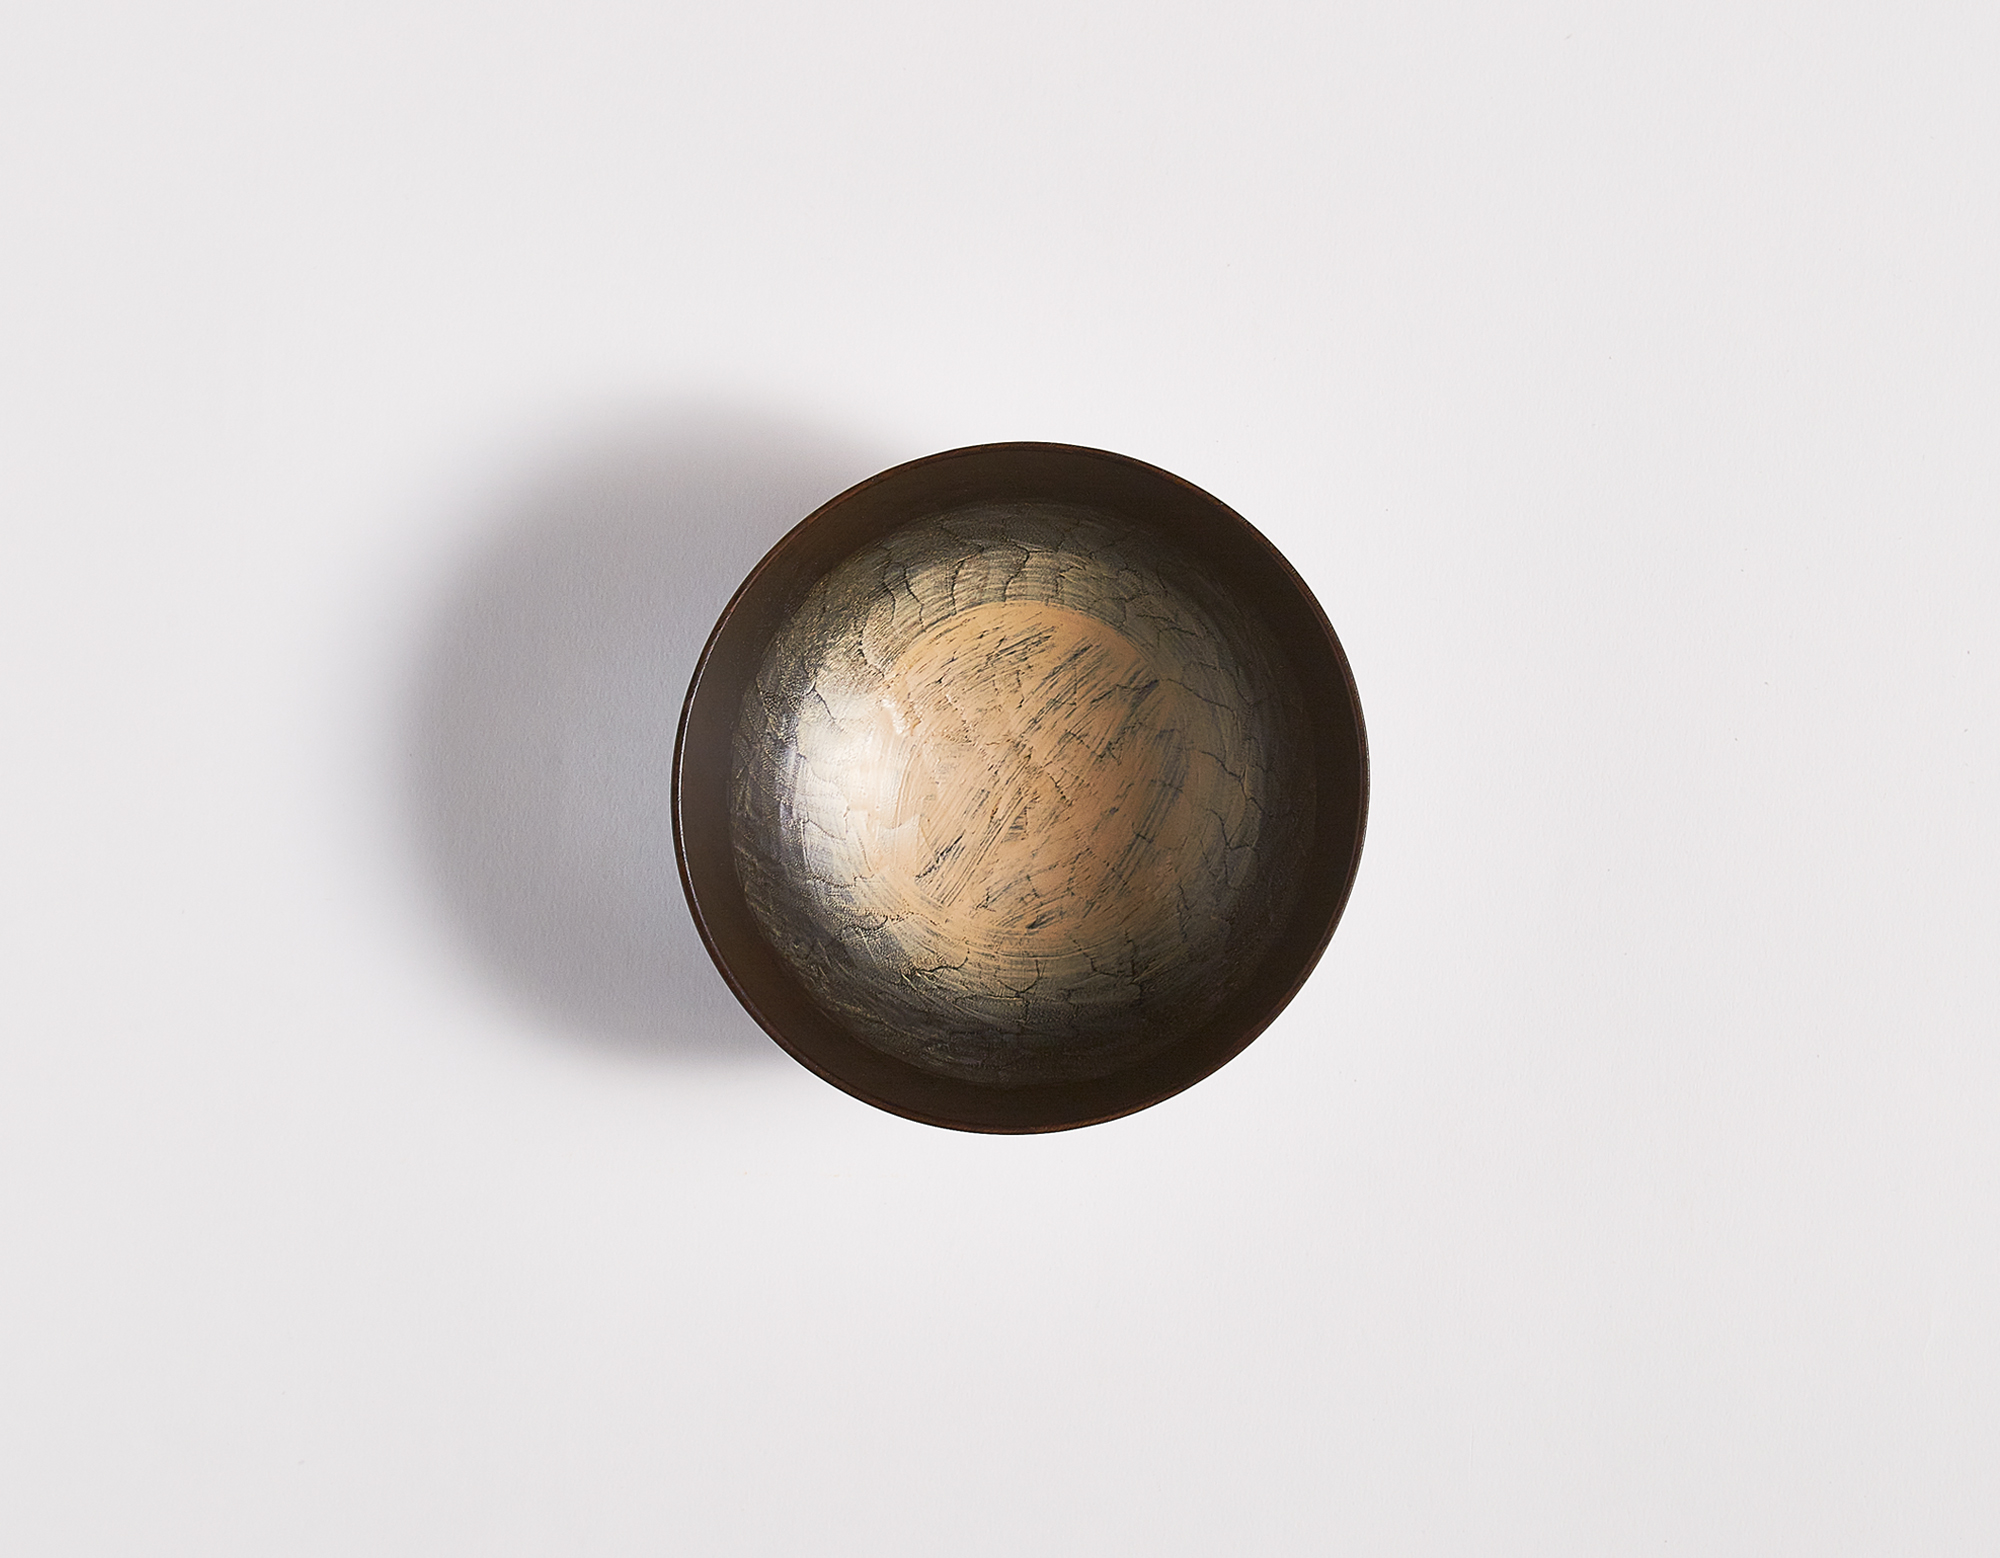 Bird's eye view of black carved wooden bowl with white lacquered interior by Ryuji Mitani